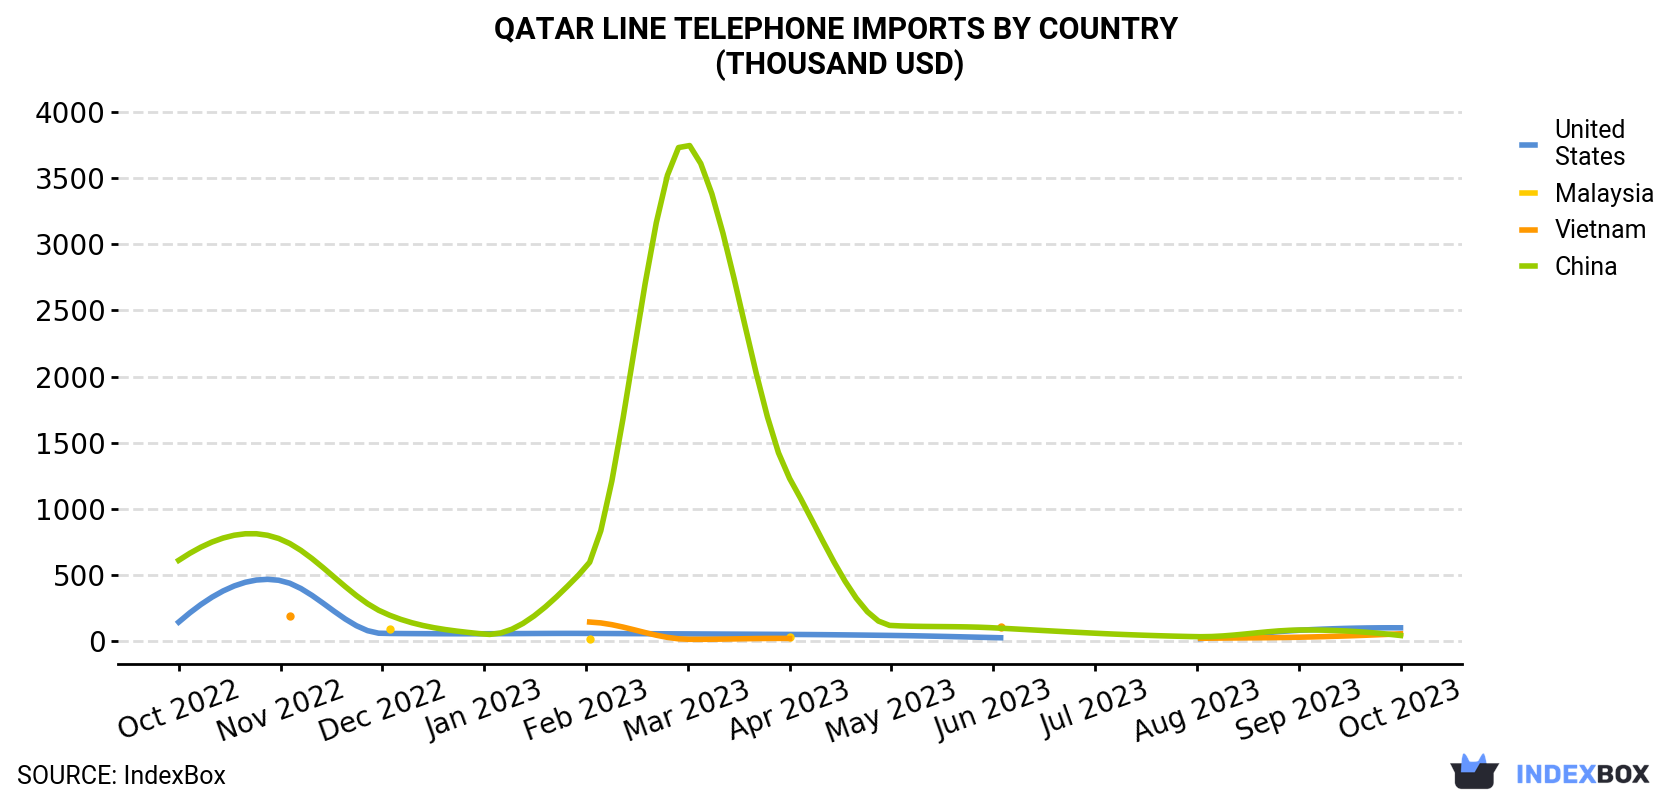 Qatar Line Telephone Imports By Country (Thousand USD)